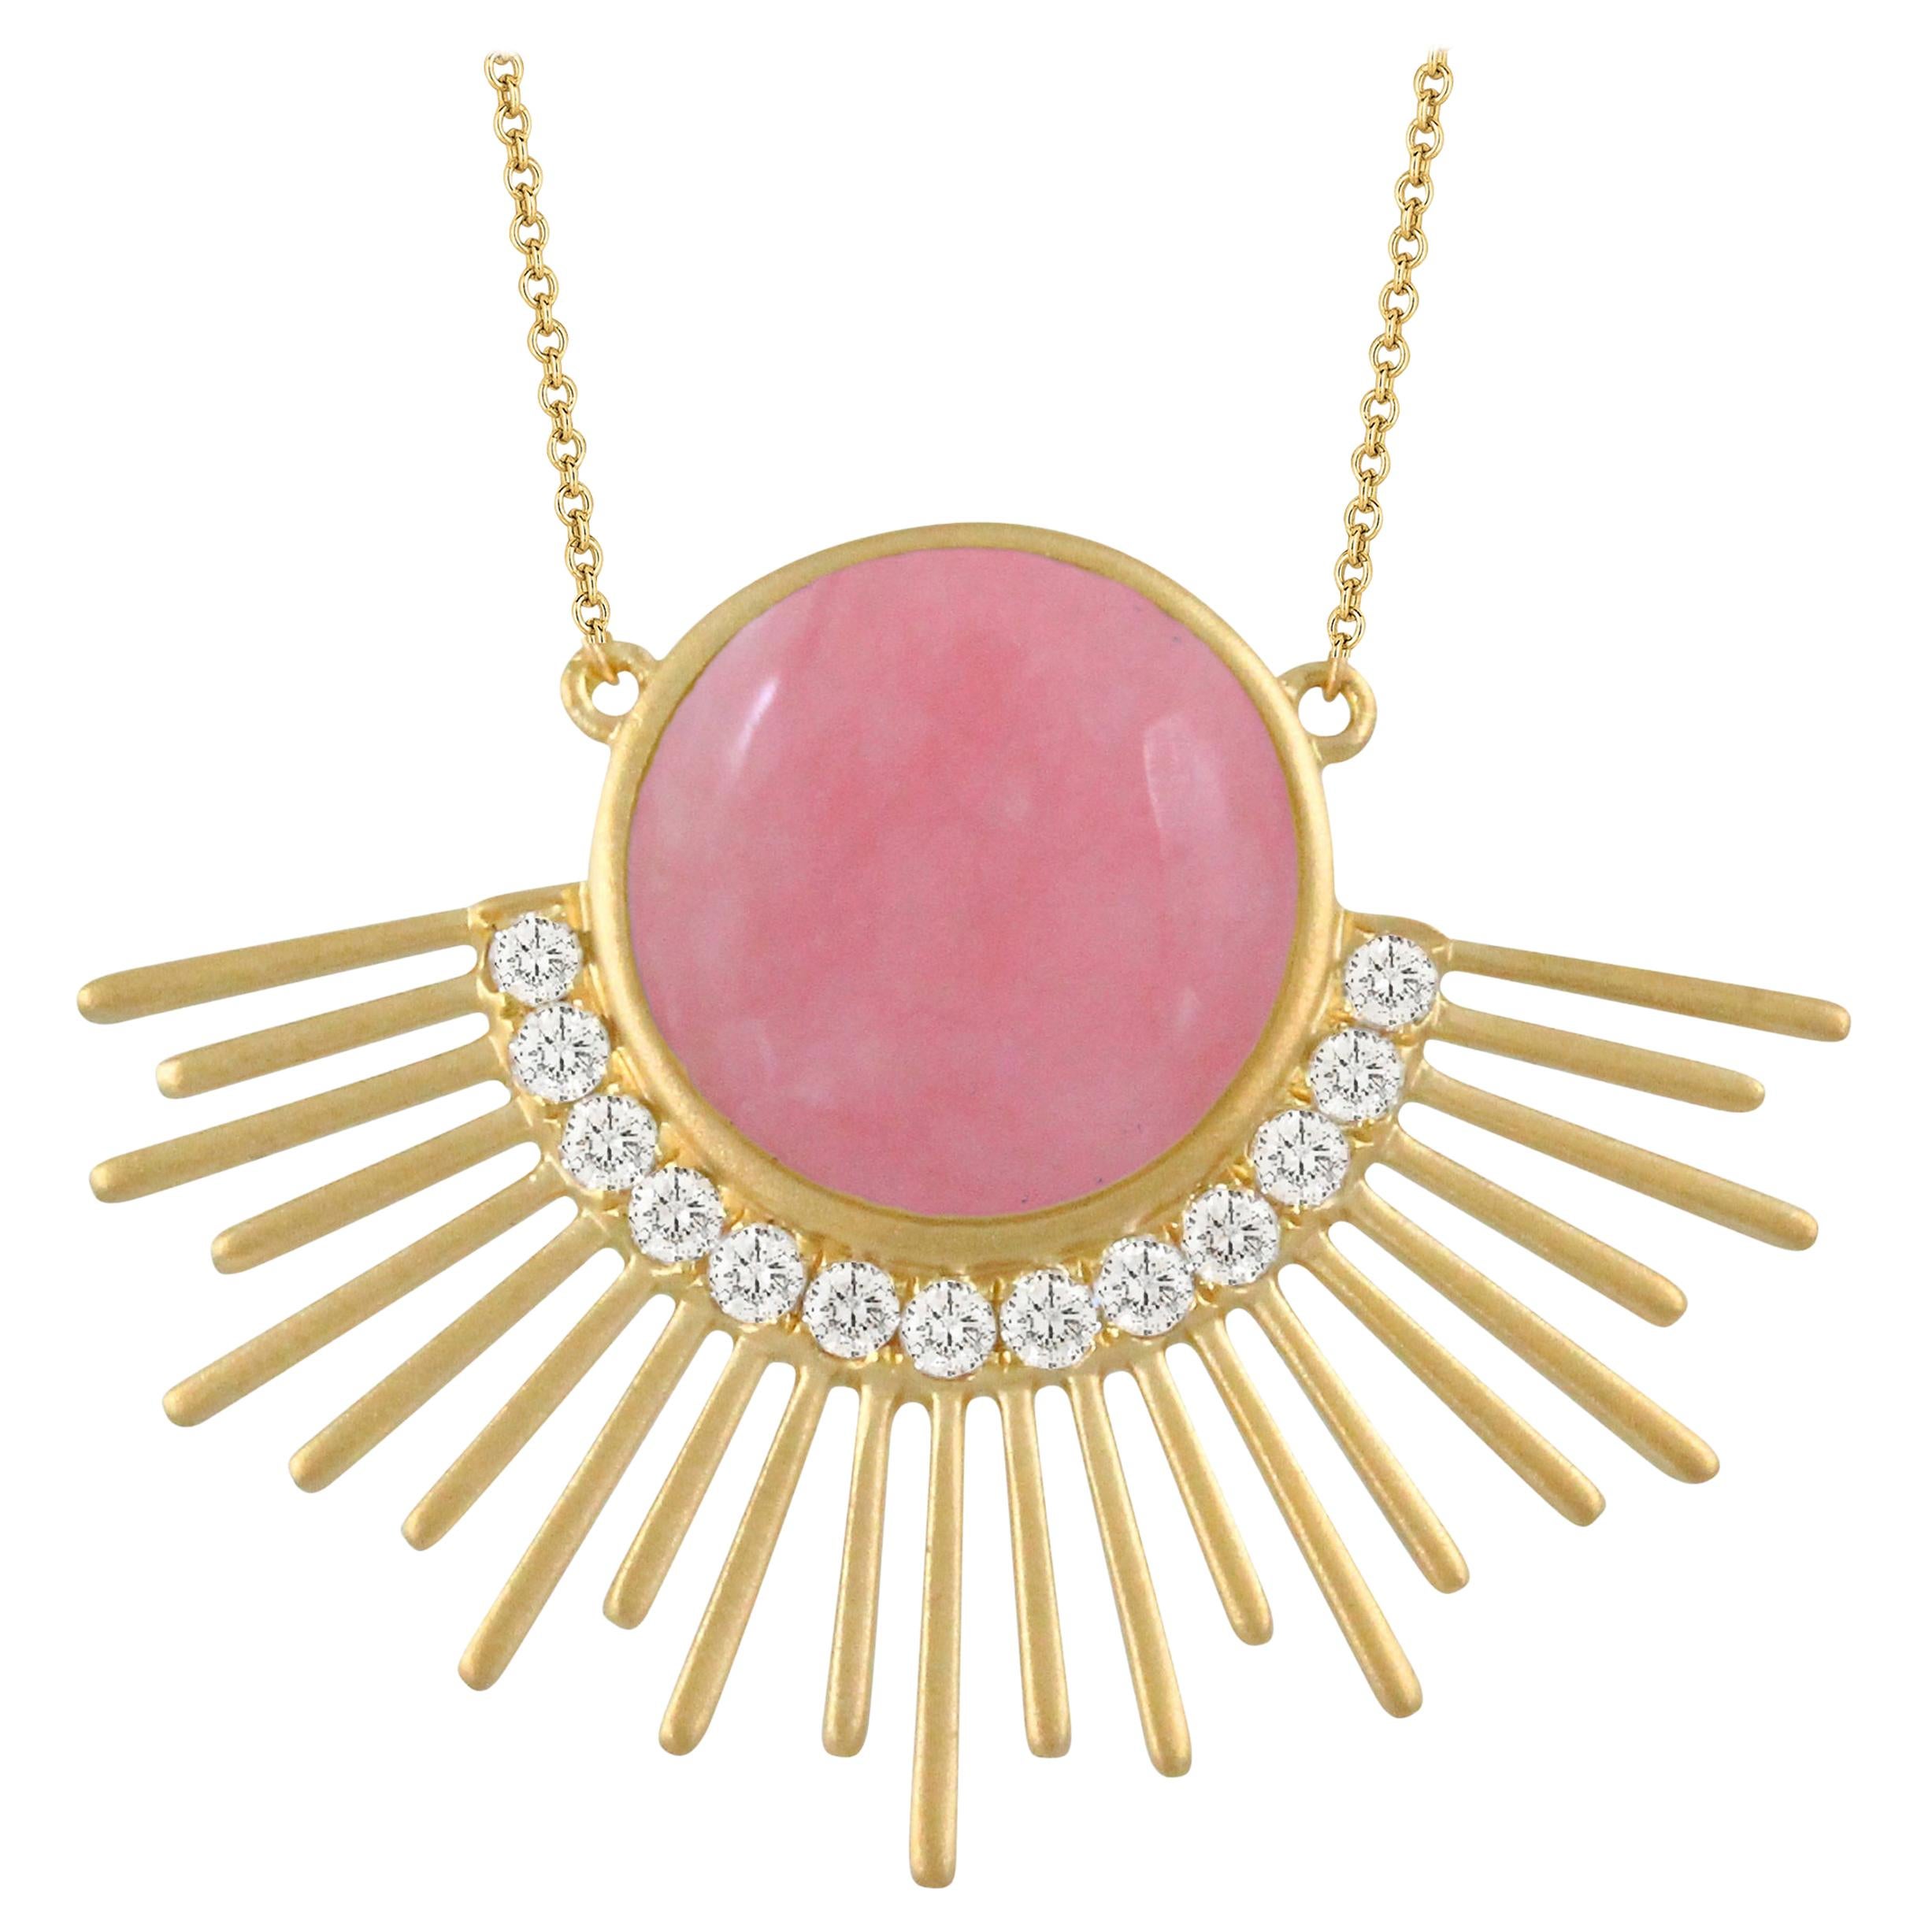 Doves 18 Karat Matte Gold Necklace with Cabochon Pink Opal and Diamonds